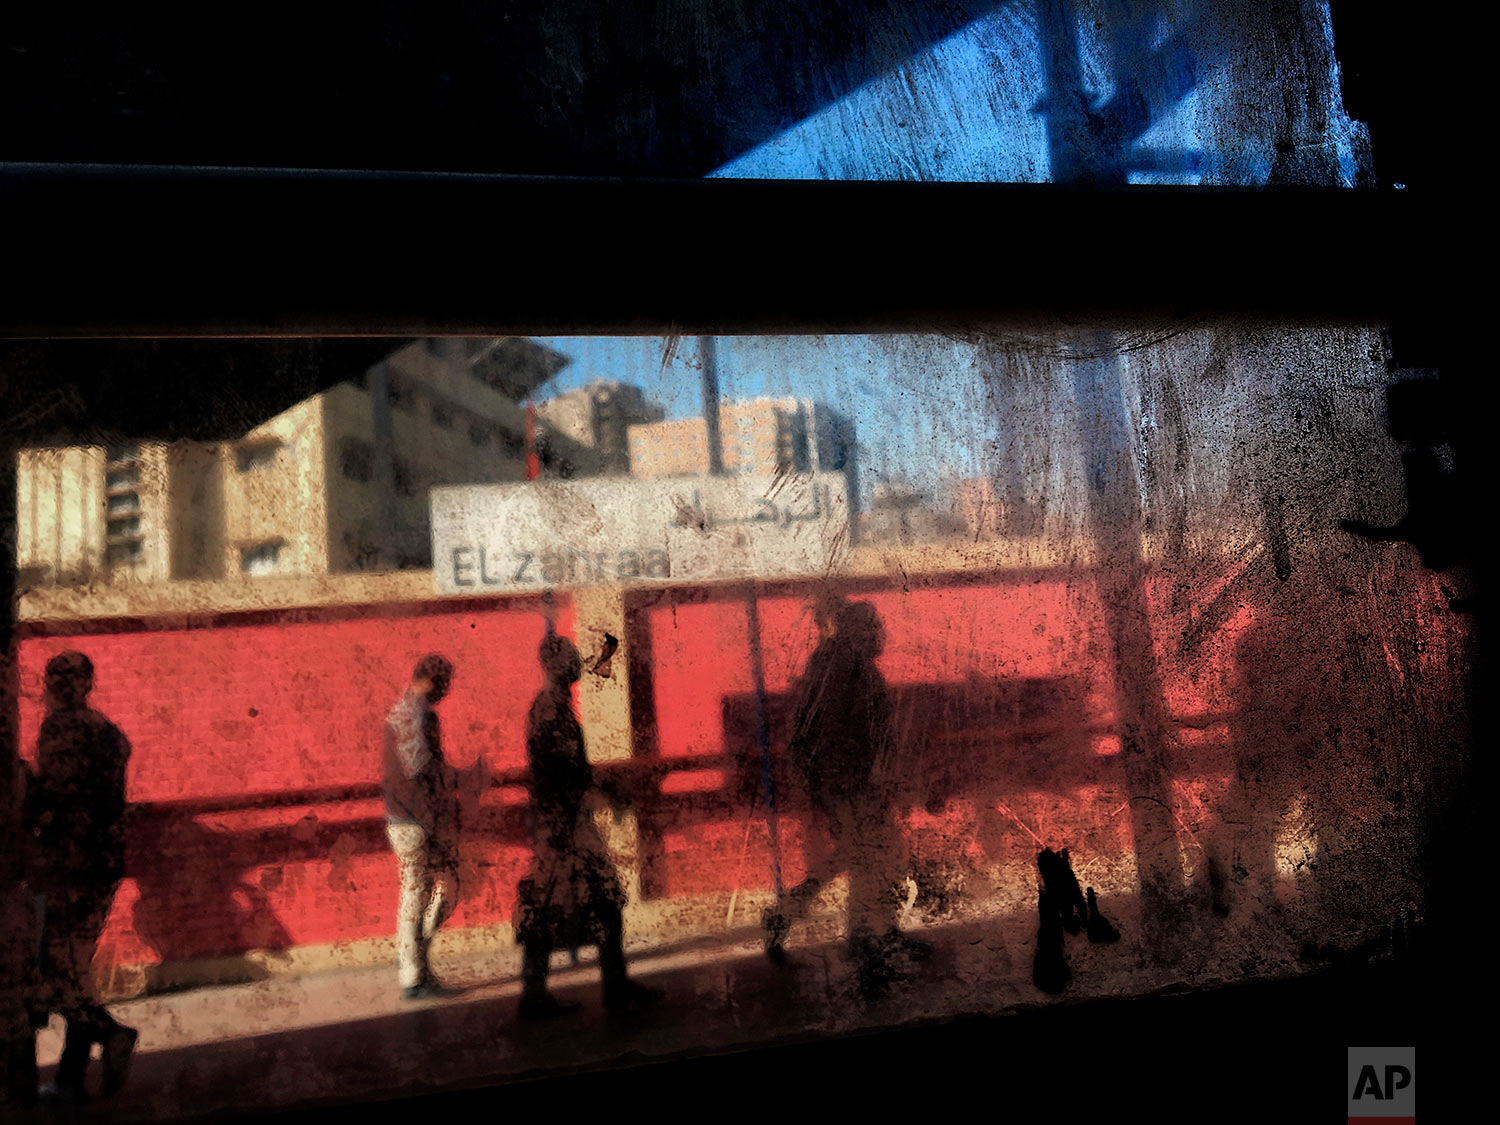  In this March 13, 2017 photo, people are seen from the window of a metro car, at El Zahraa metro station in Cairo, Egypt. Cairo’s subway is perhaps the cheapest in the world, 11 cents to ride as far as you want across the overcrowded, traffic-choked Egyptian capital -- but even that feels like a burden to many Egyptians at a time of tough economic reforms. (AP Photo/Nariman El-Mofty) 